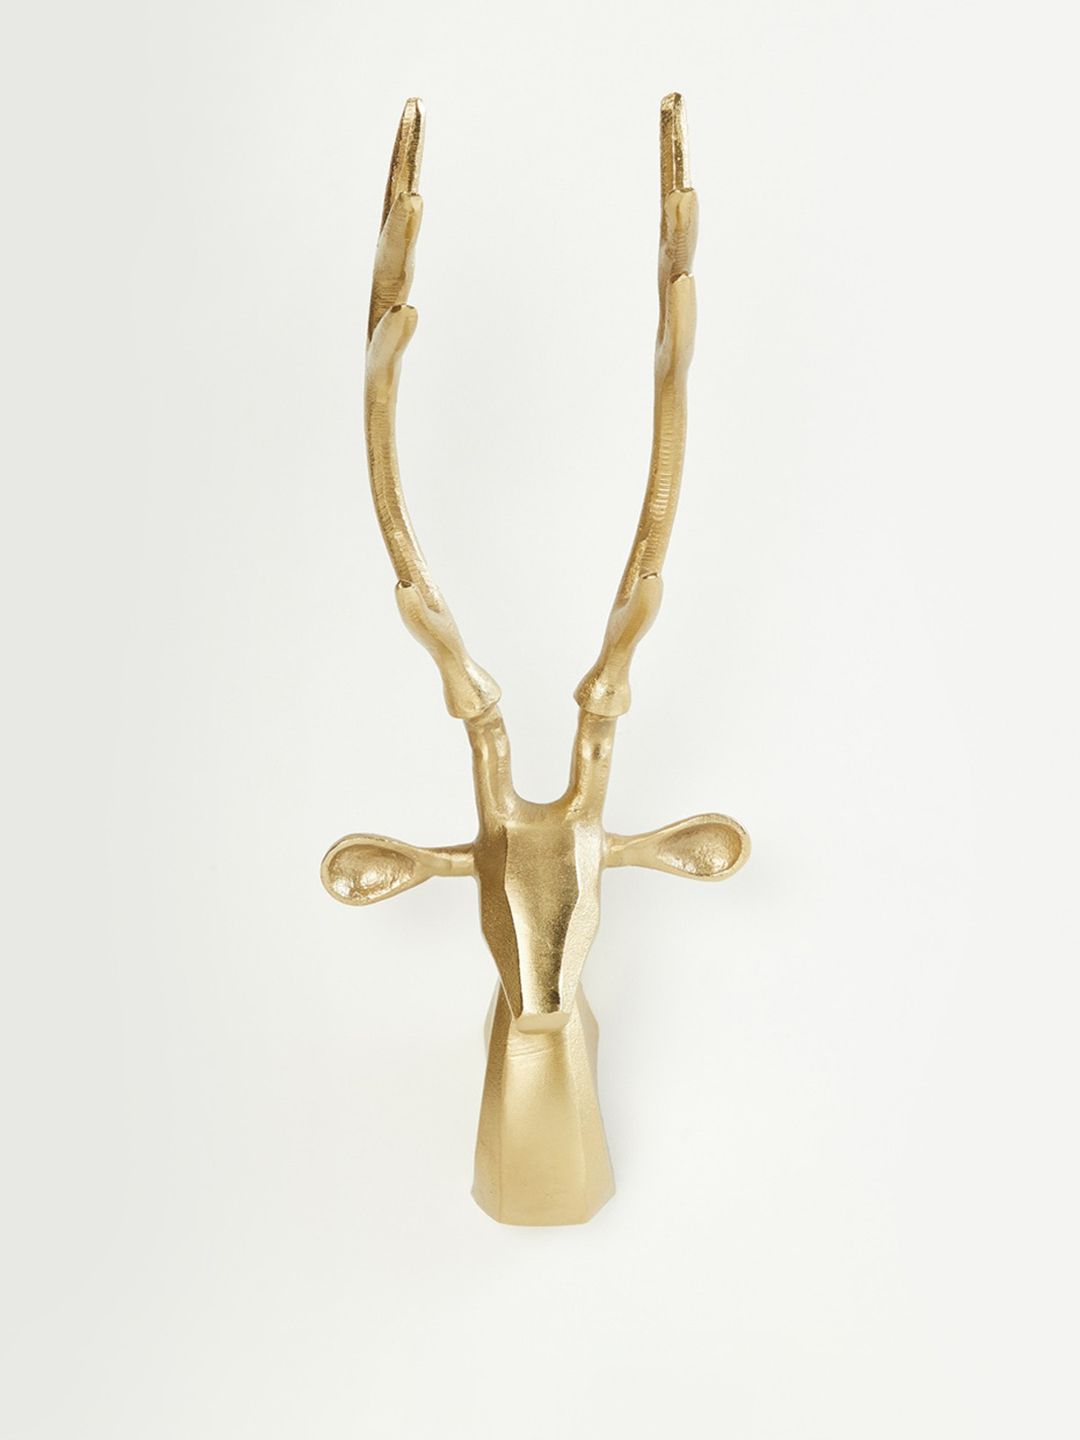 Home Centre Gold-Plated Metal Wall Mounted Reindeer Figurine Price in India